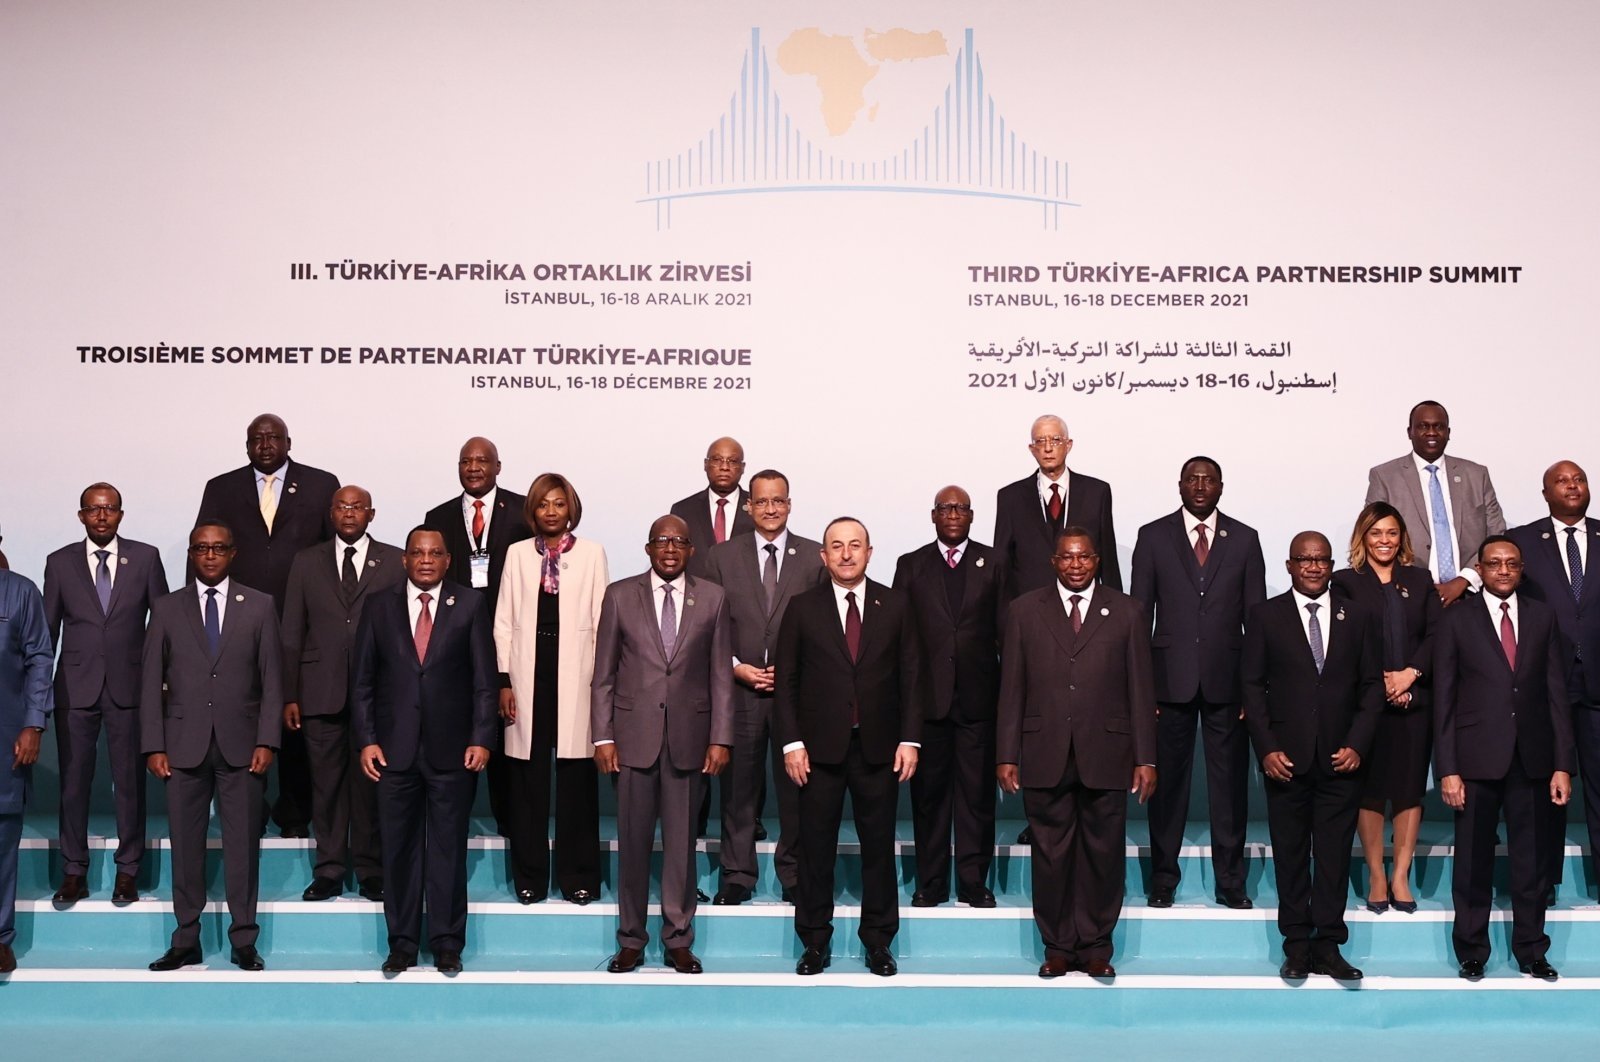 Foreign Minister Mevlüt Çavuşoğlu (C) and visiting foreign ministers at the third Turkey-Africa Partnership Summit in Istanbul, Turkey, Dec. 17, 2021. (AA Photo)